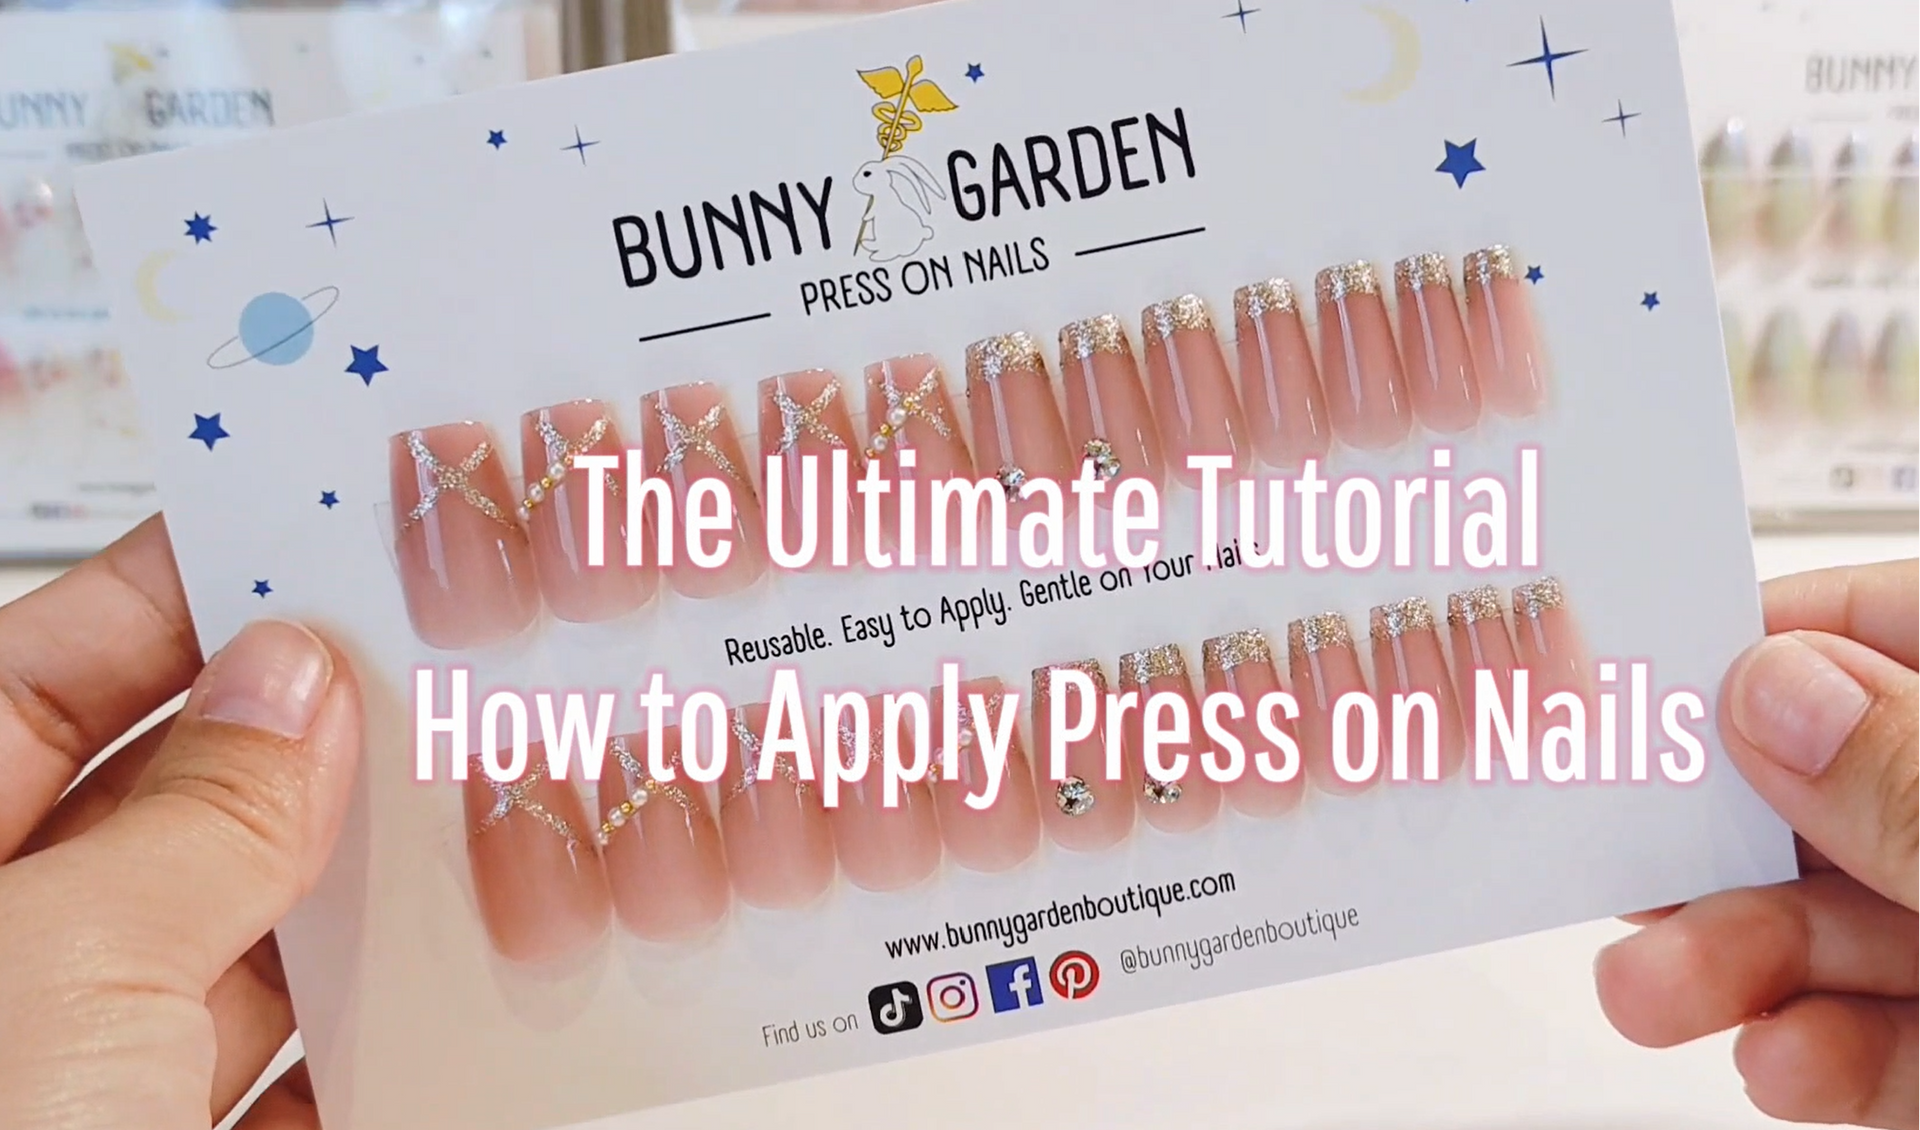 Load video: Ultimate Tutorial on How to Apply Press on Nails